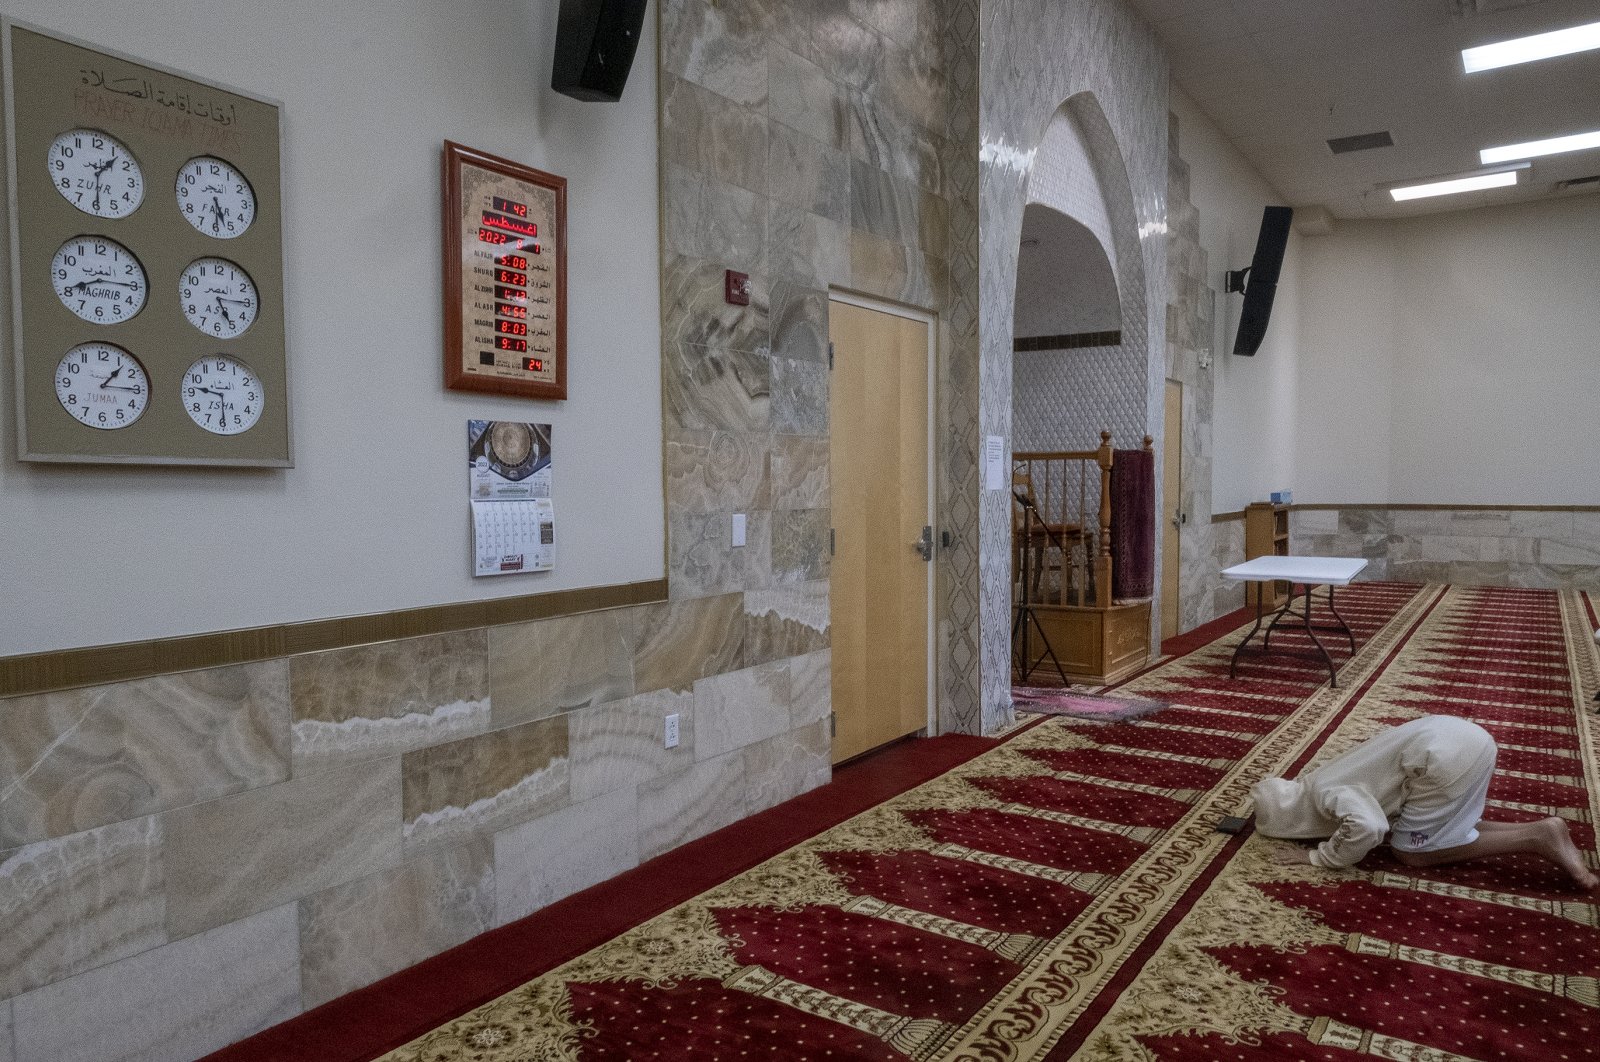 A young man bows during the Dhuhr afternoon prayer at the Islamic Center of New Mexico, U.S., Aug. 7, 2022. (Adolphe Pierre-Louis/The Albuquerque Journal via AP)